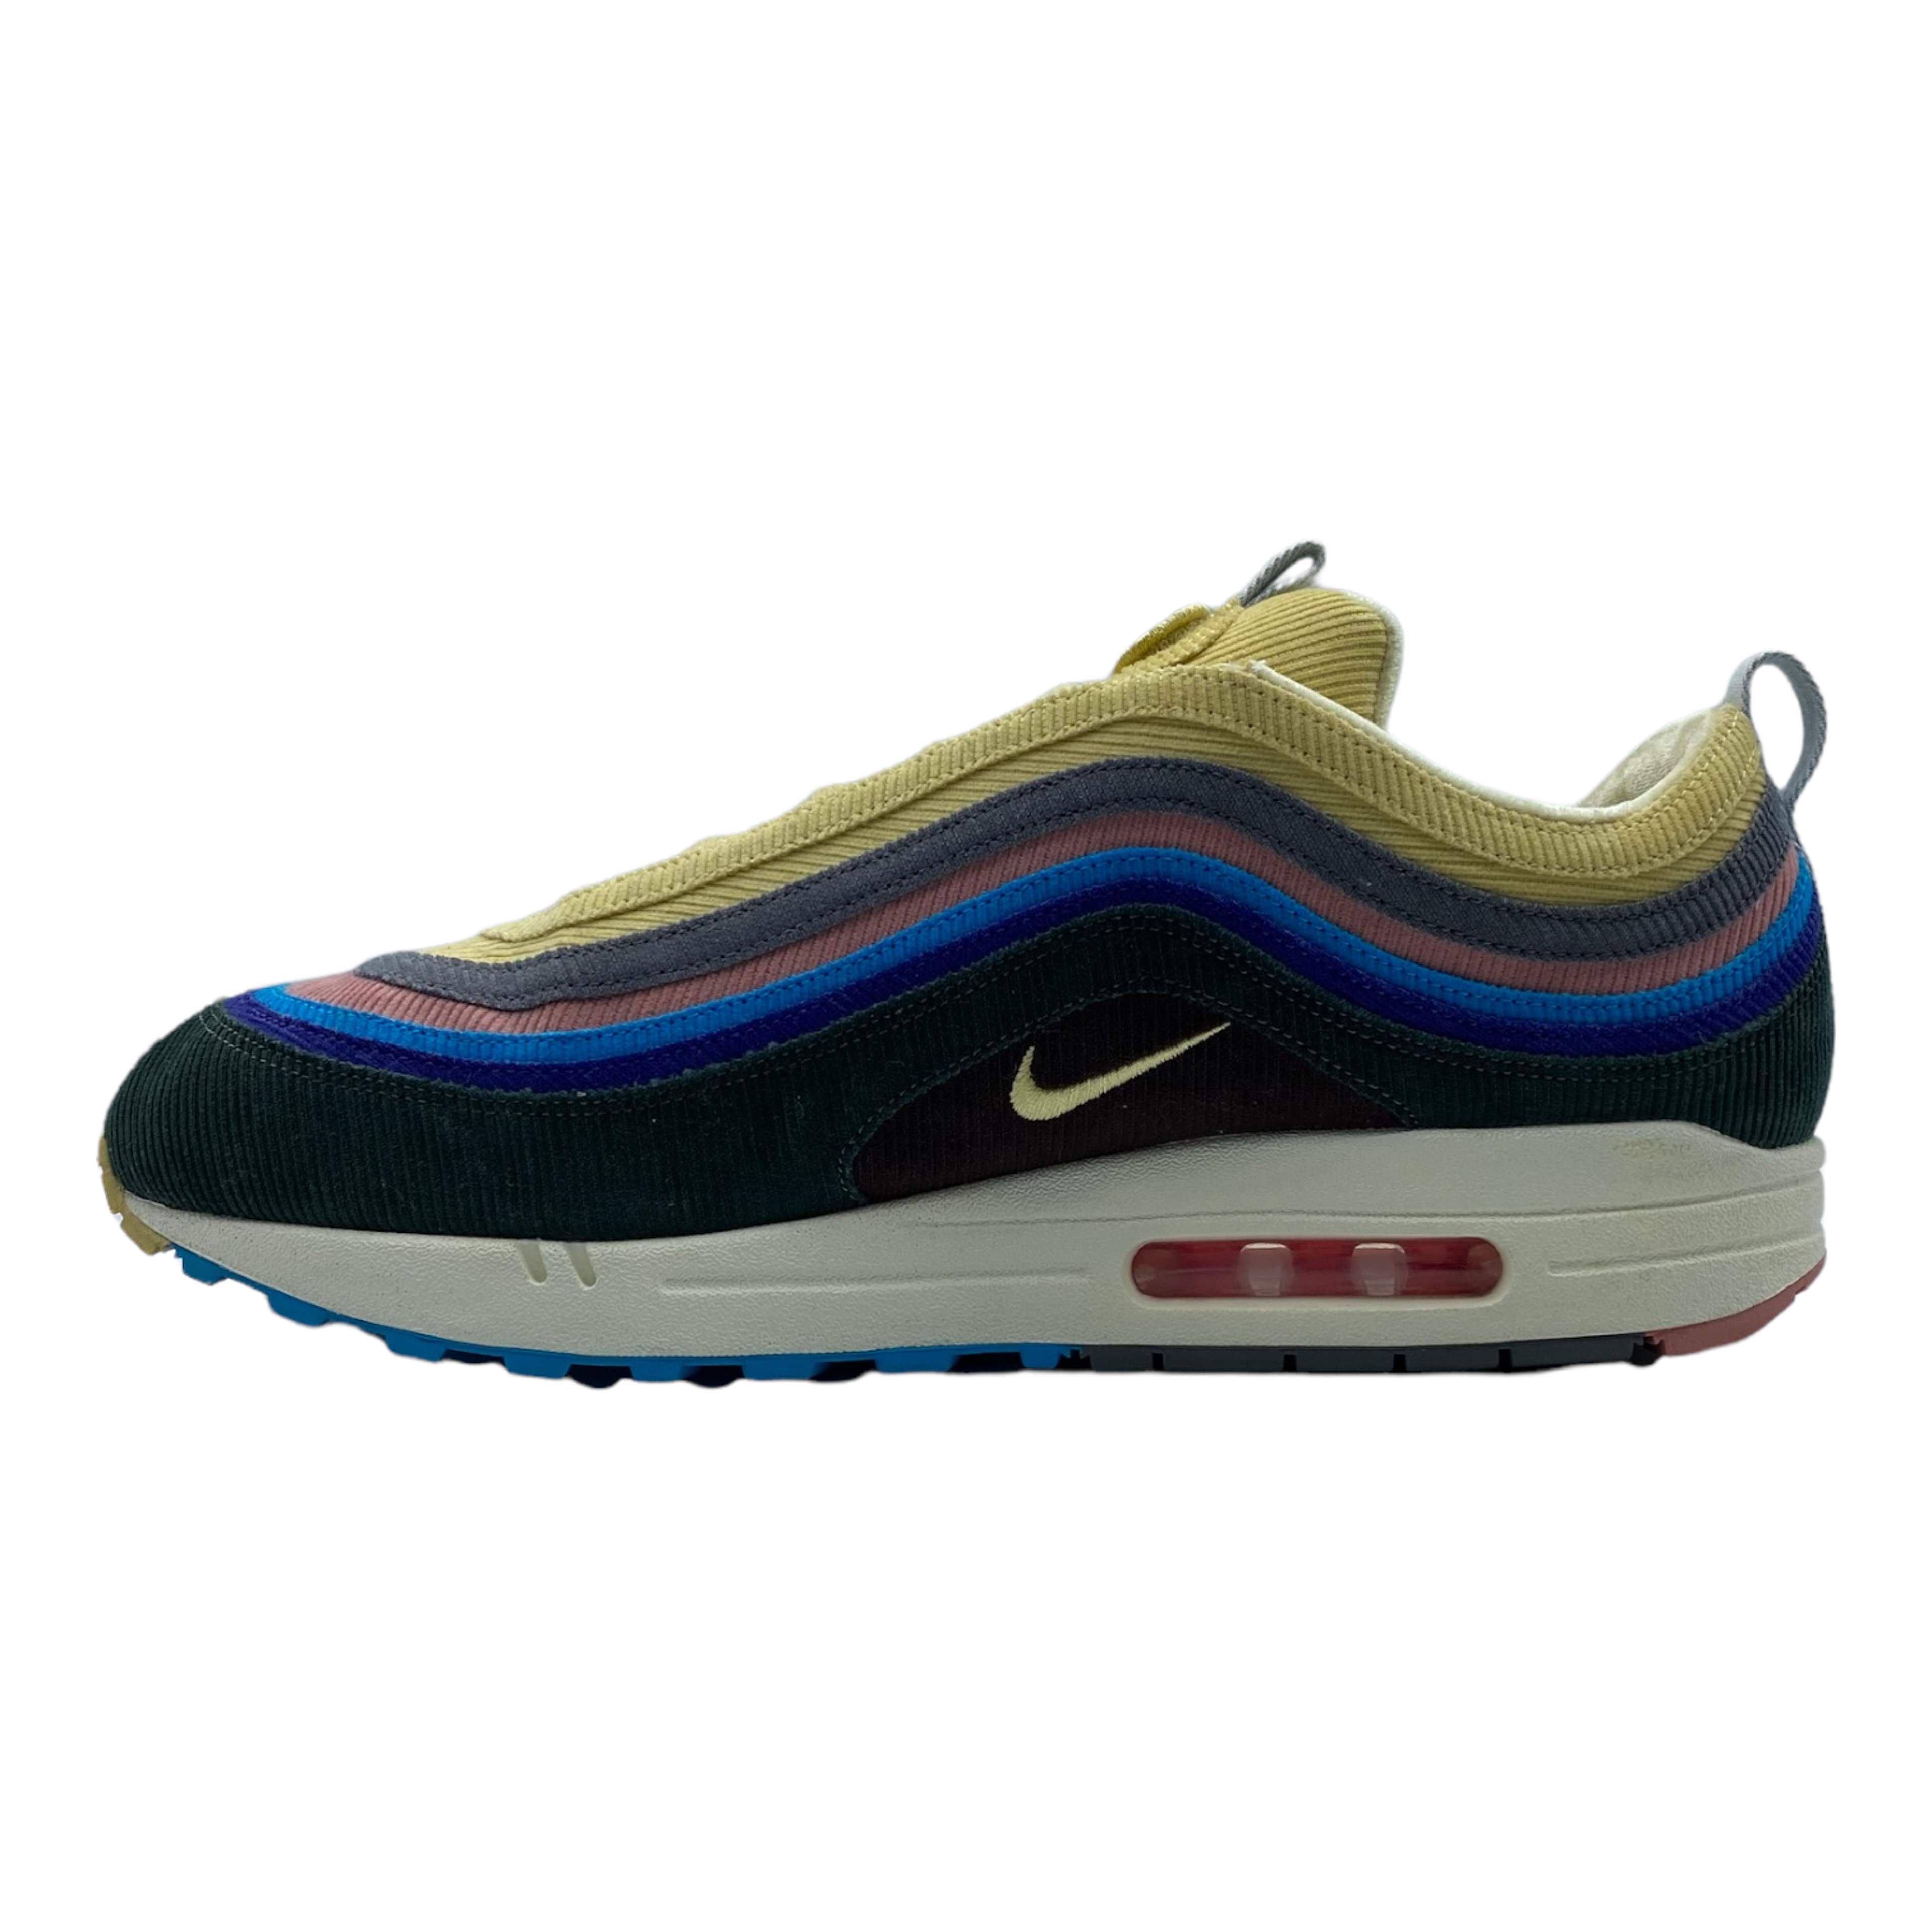 Alternate View 2 of Nike Air Max 1/97 Sean Wotherspoon (Extra Lace Set Only) Pre-Own